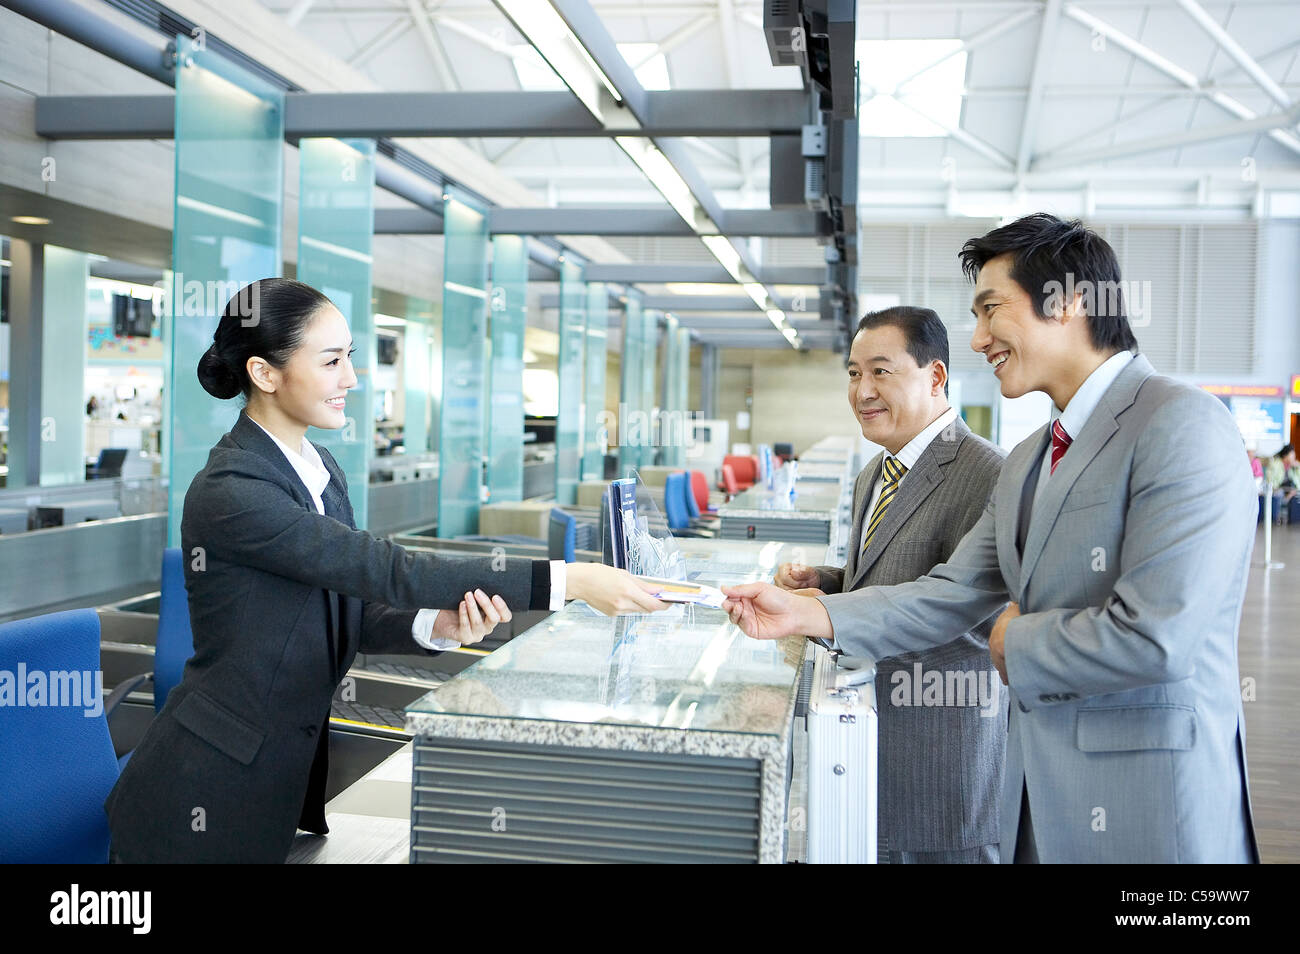 Businesswoman giving passport and airline ticket to young businessman while mature businessman looking at check-in counter Stock Photo